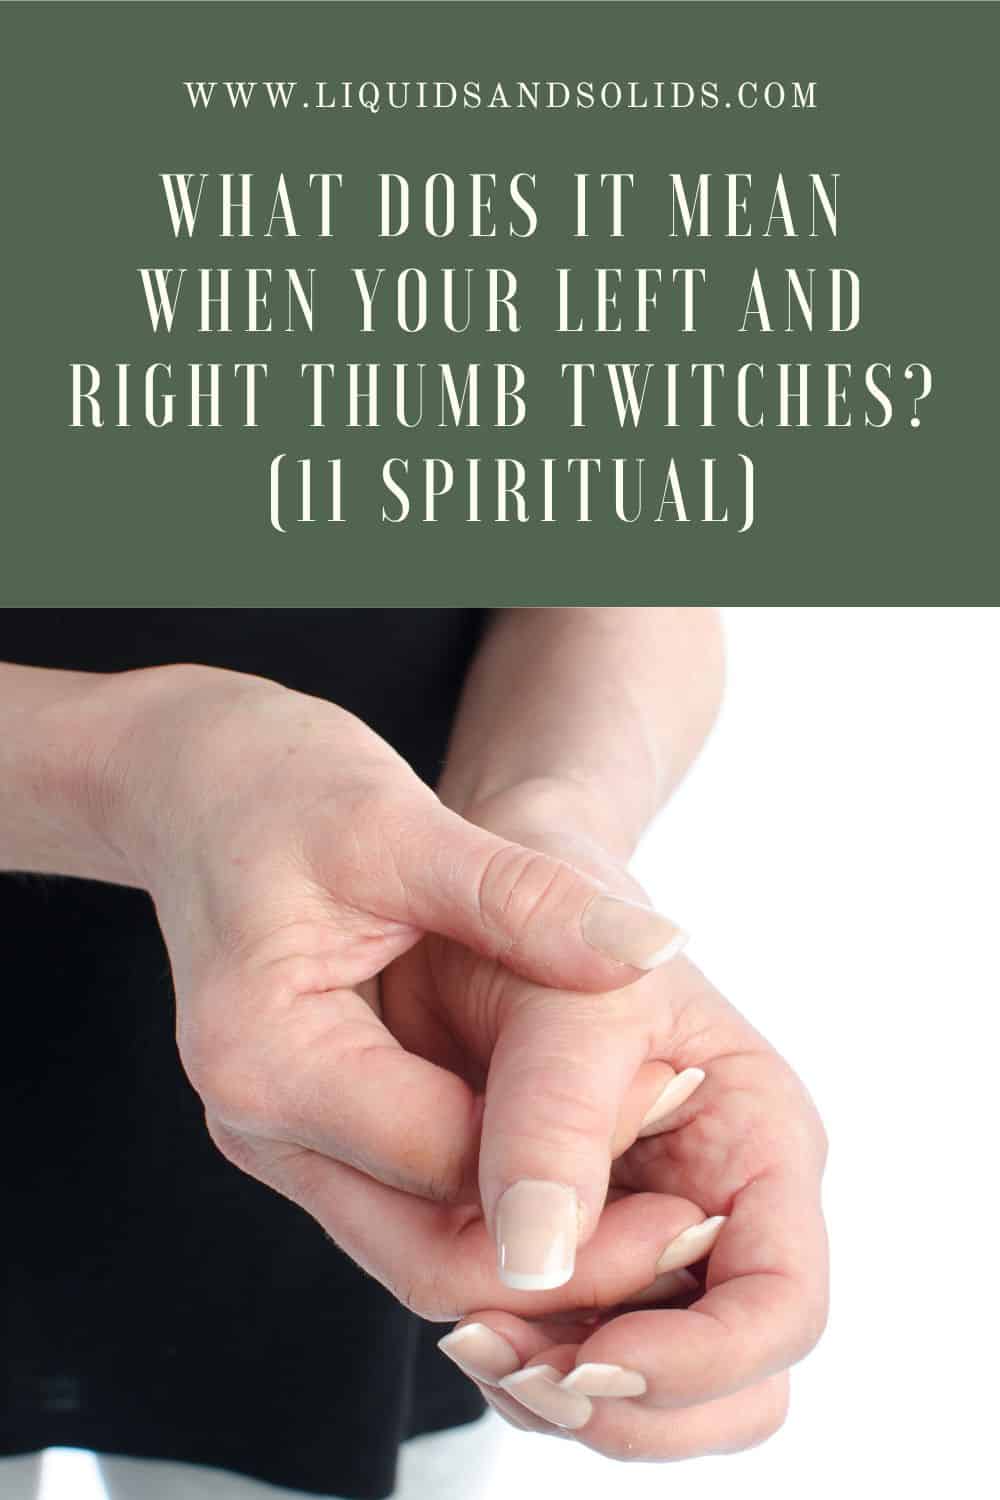 What Does It Mean When Your Left And Right Thumb Twitches?